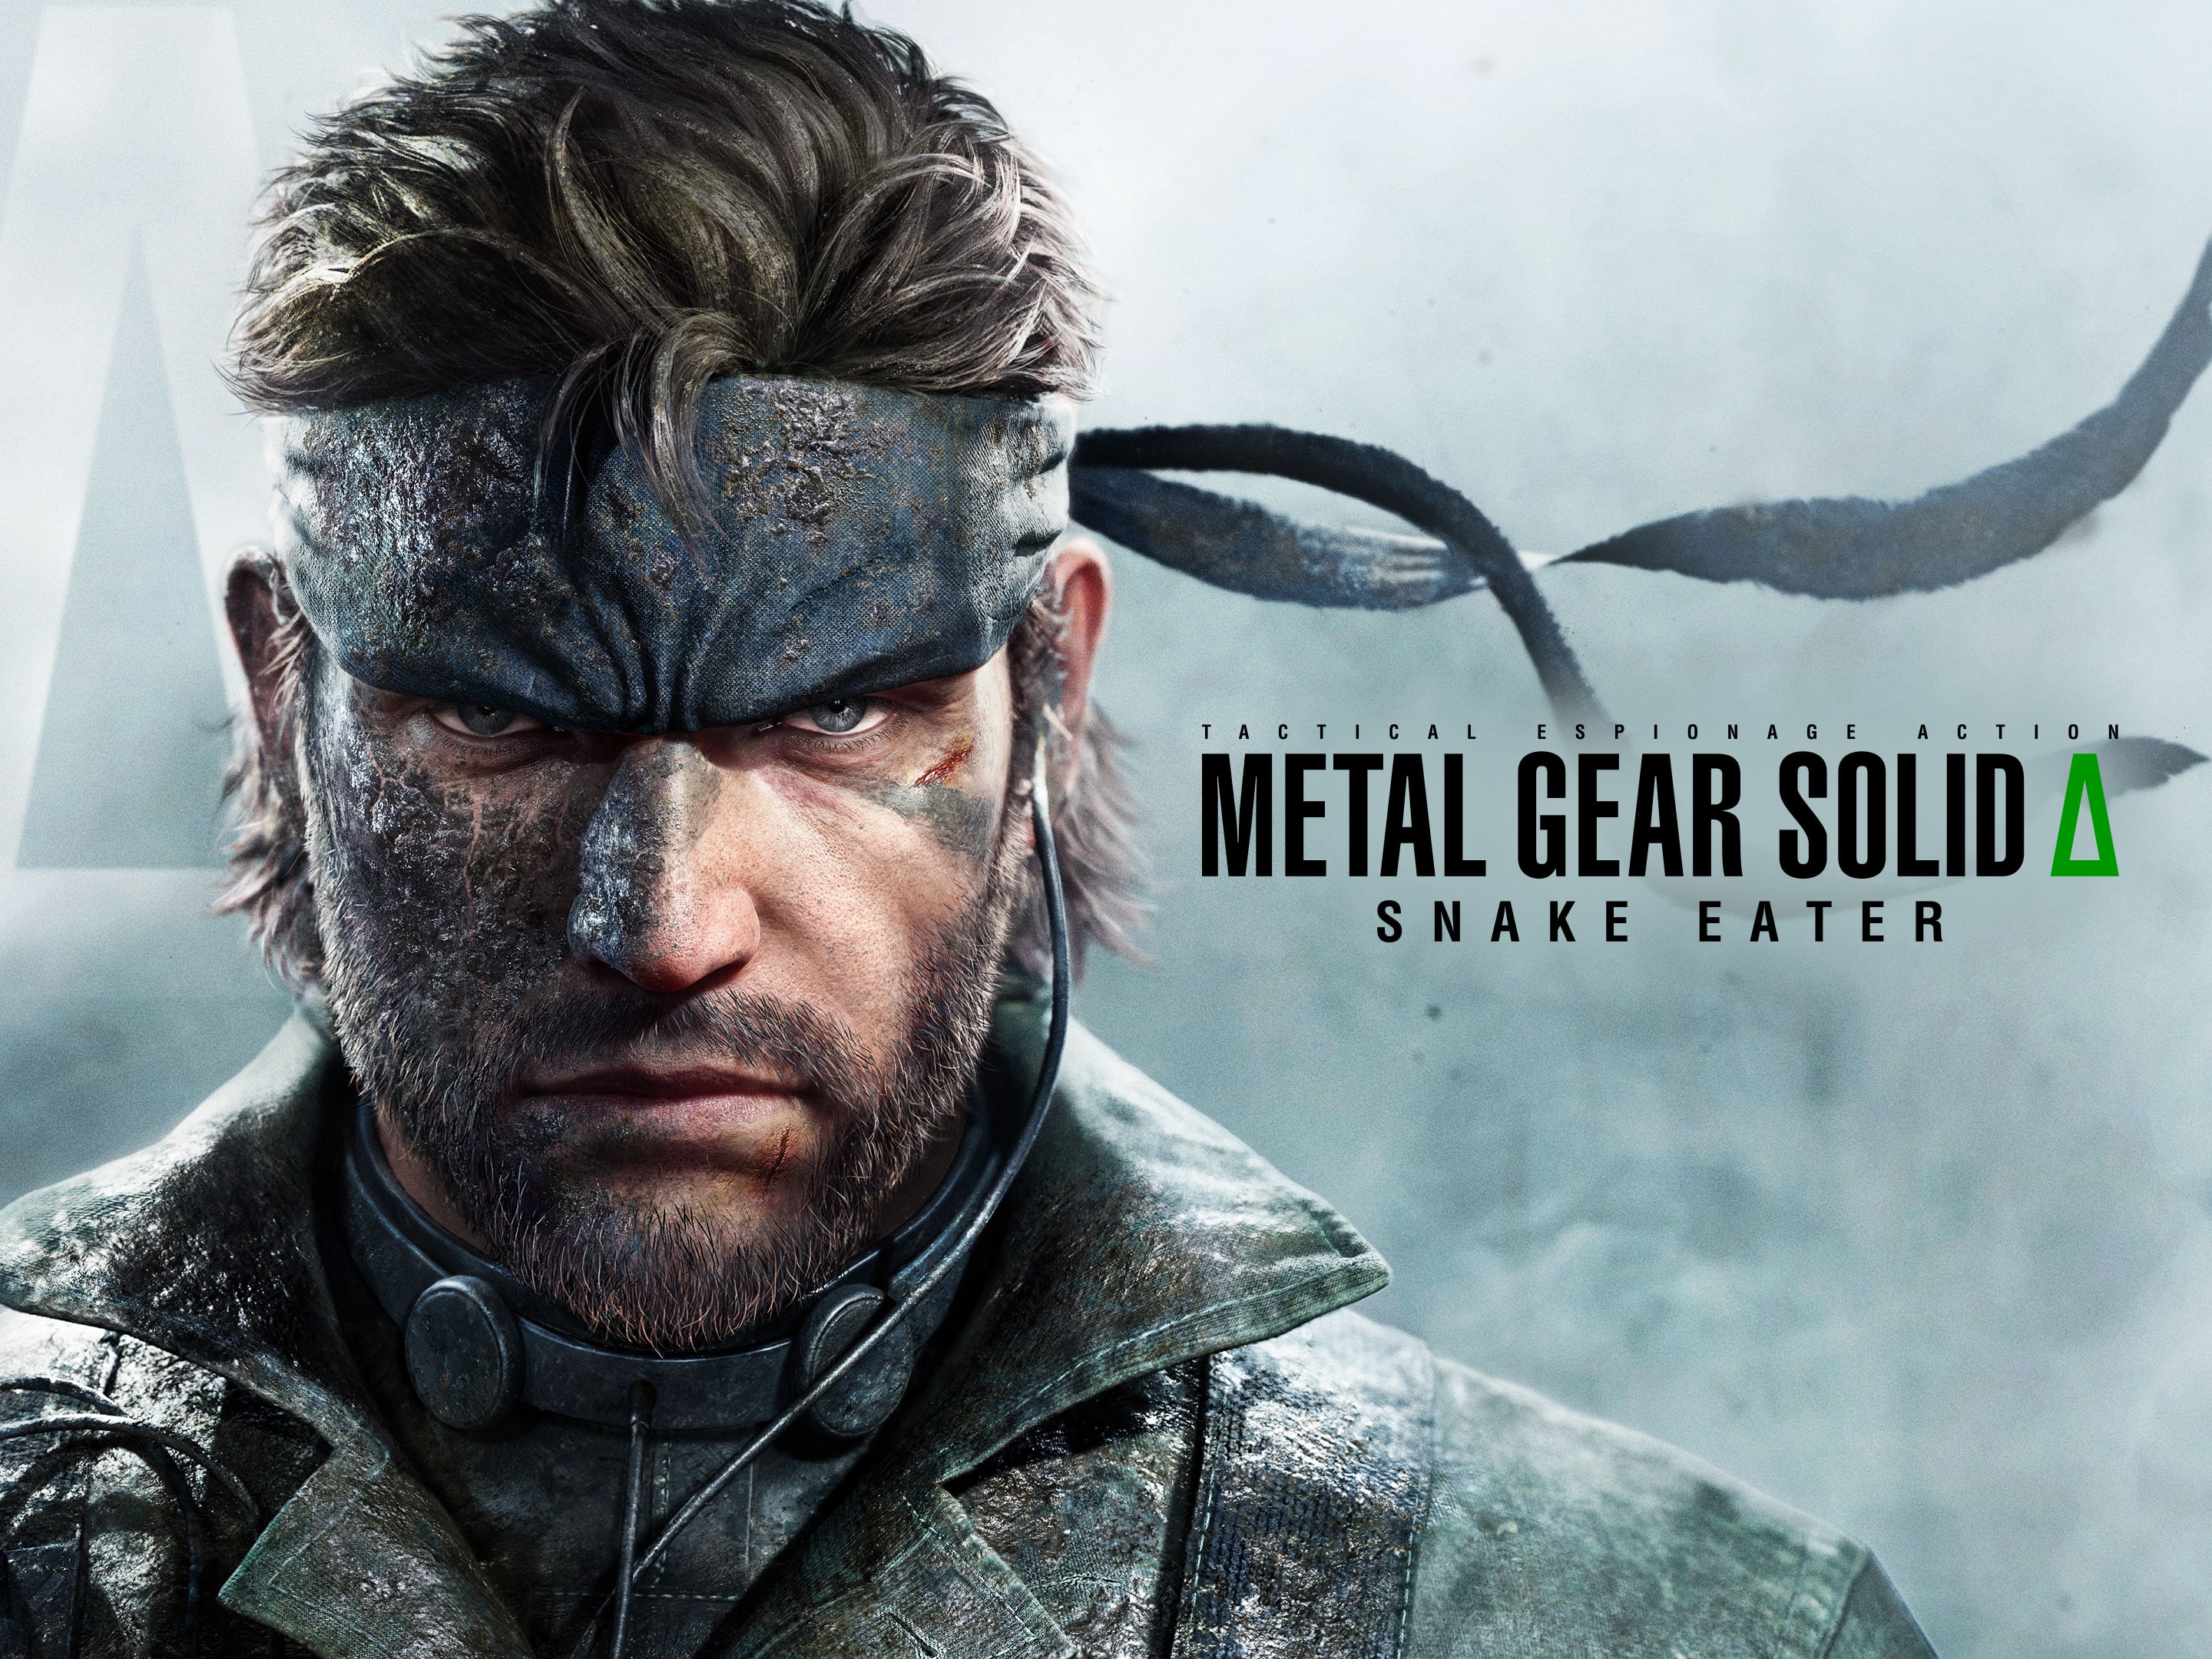 metal gear solid δ: snake eater